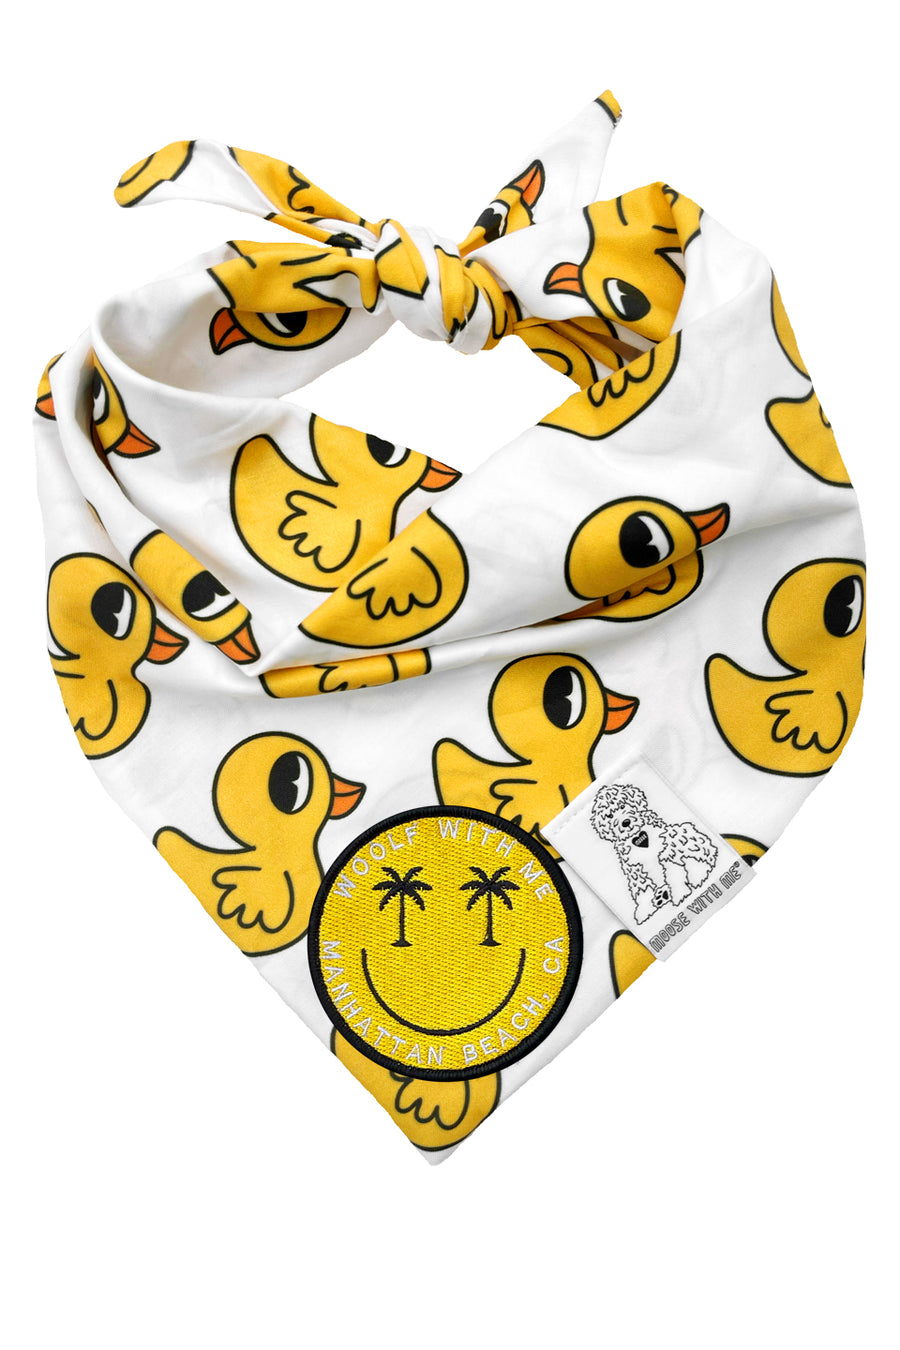 Dog Bandana Rubber Duck - Customize with Interchangeable Velcro Patches